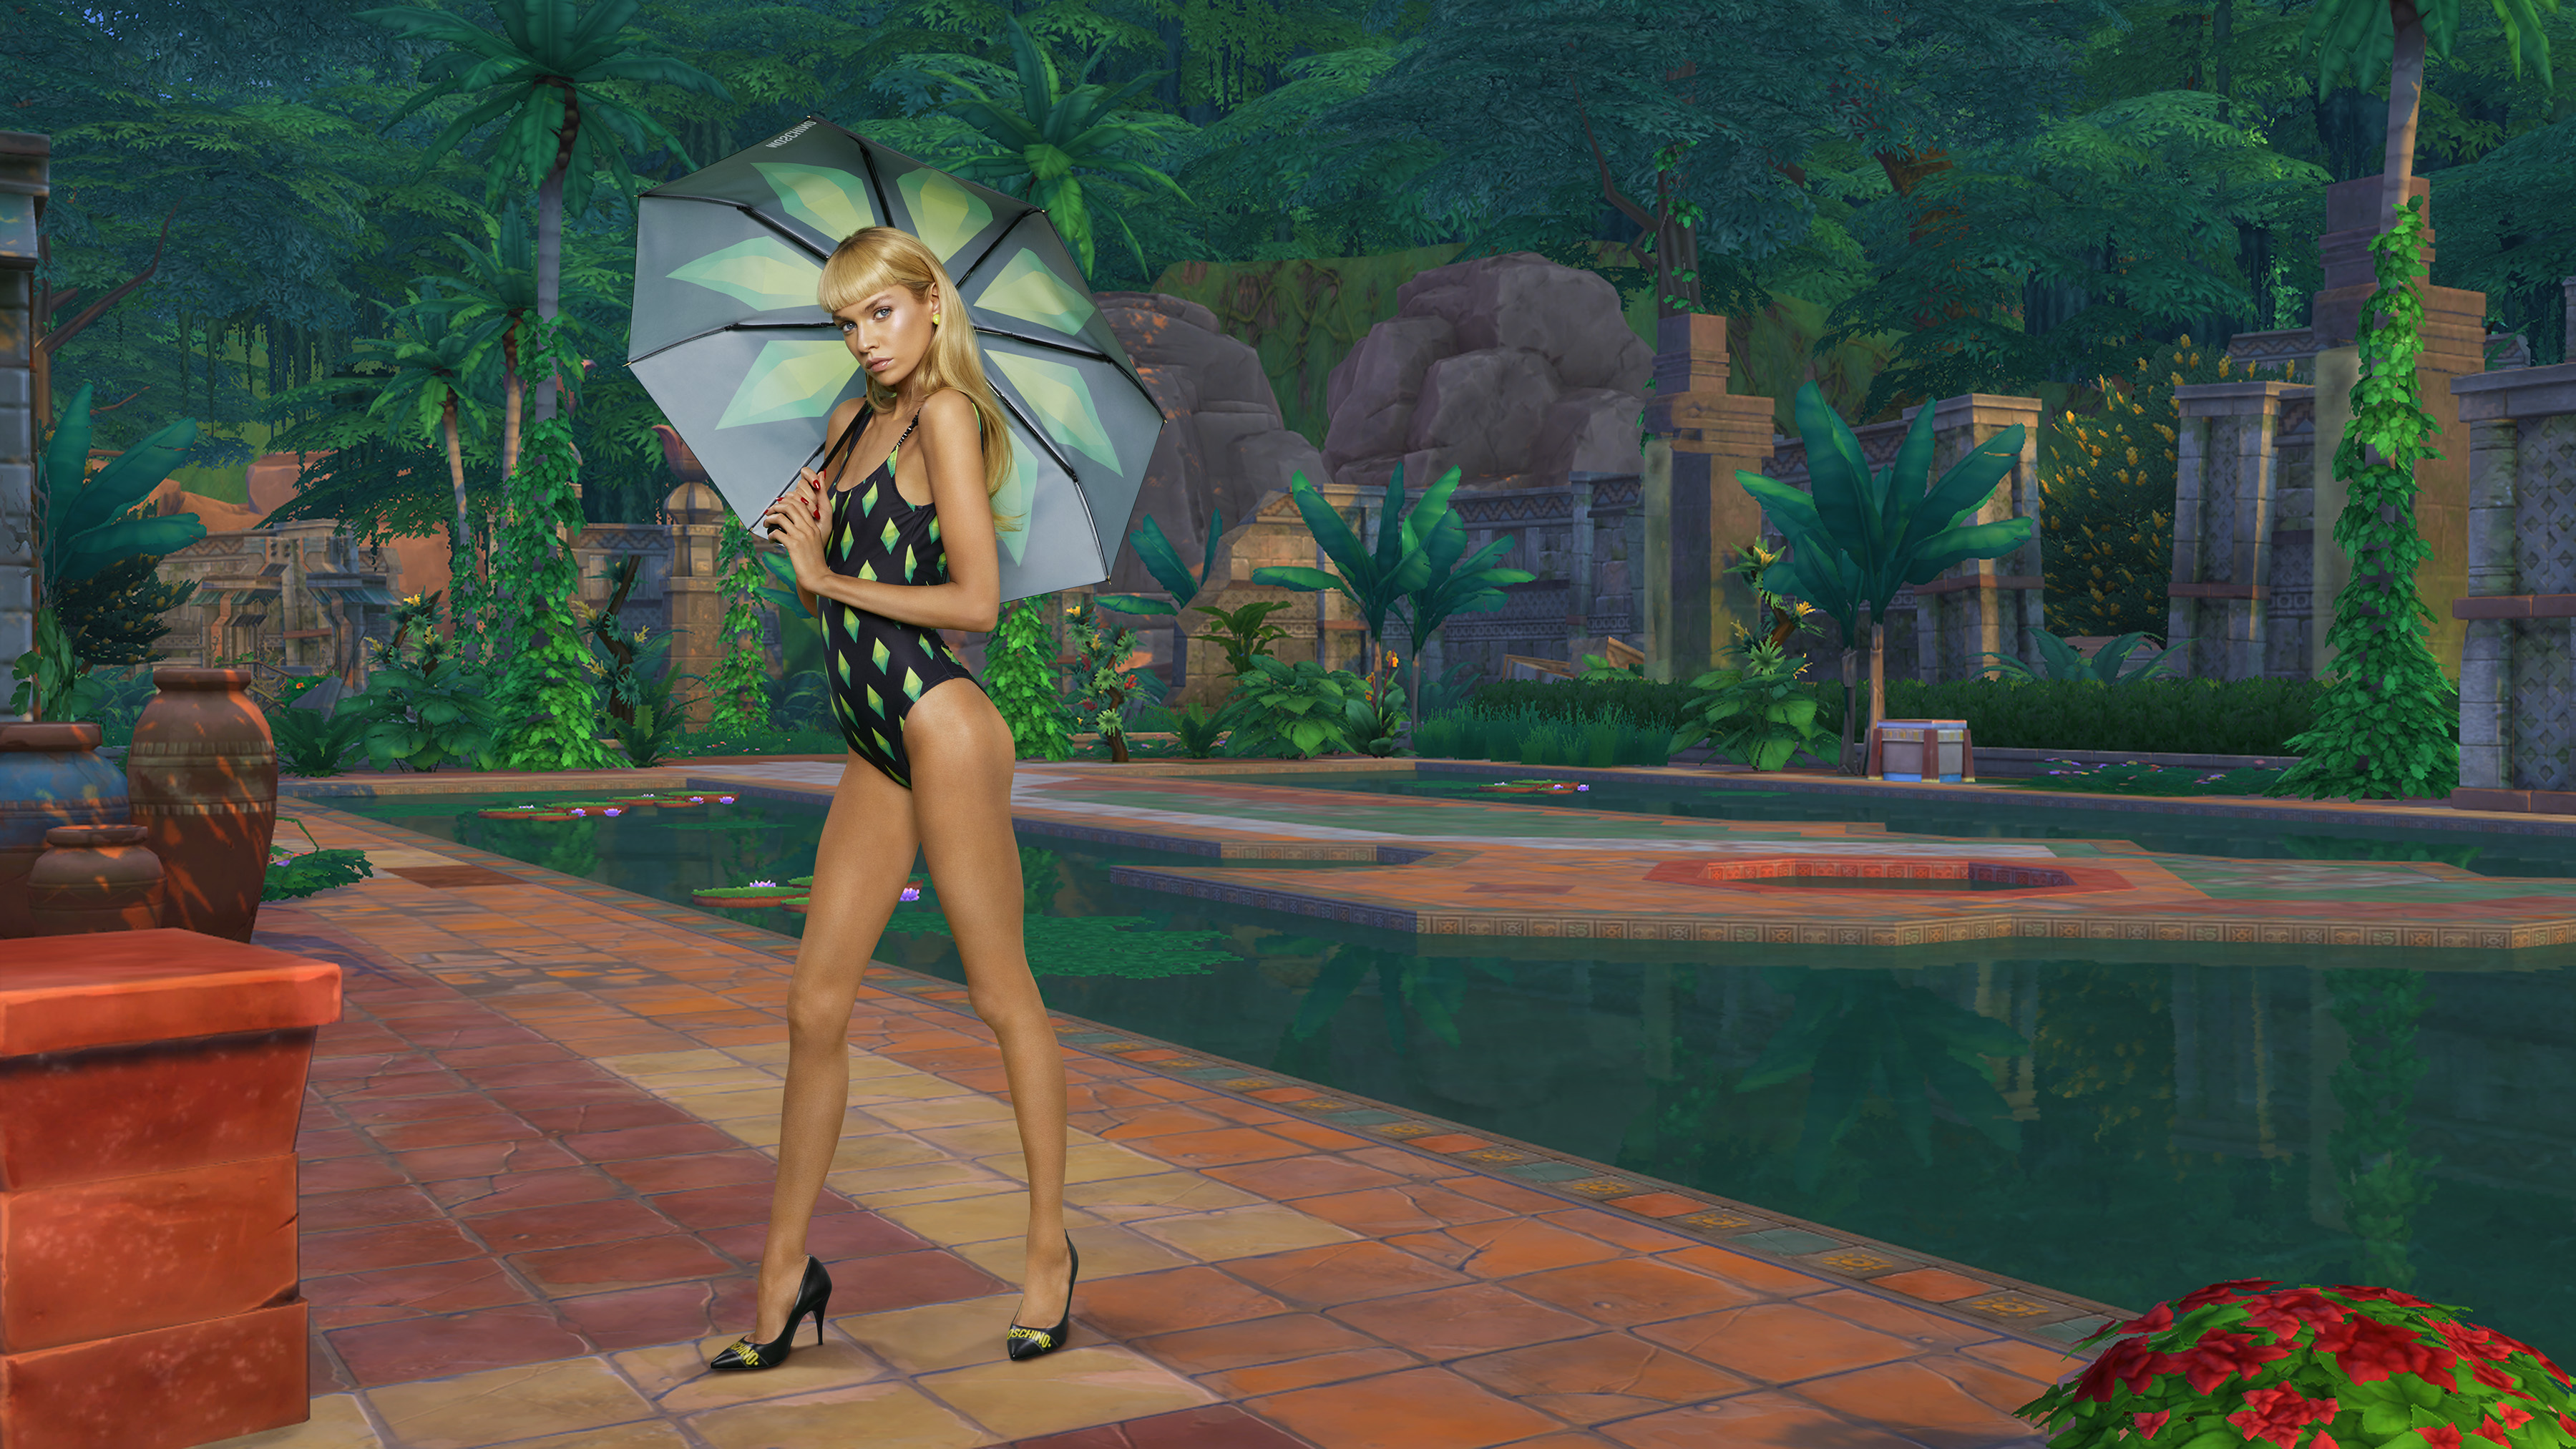 The Sims 4 Moschino Stuff Pack Twitch Stream Shows A Huge Amount